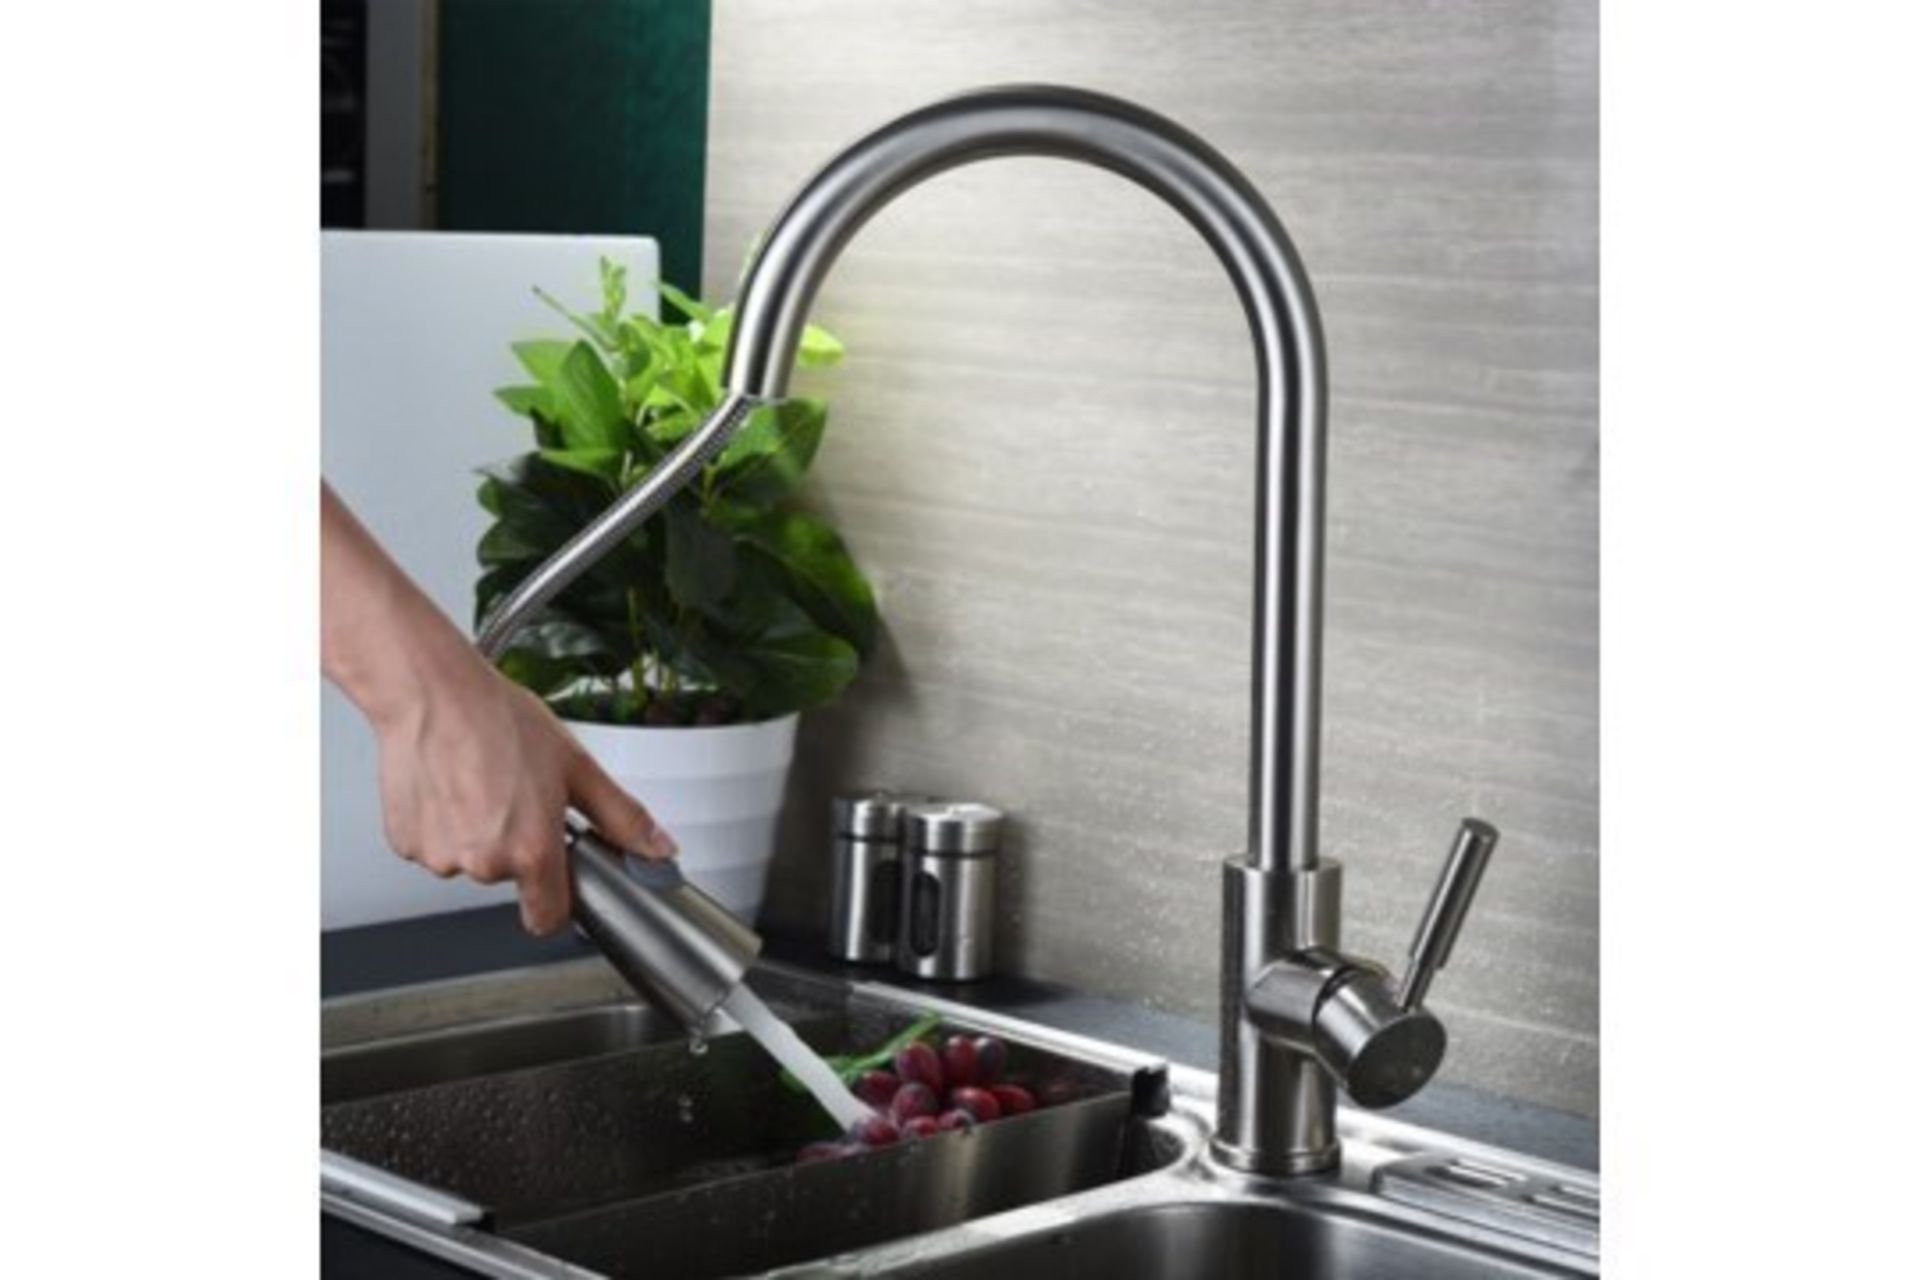 NEW & BOXED Della Modern Monobloc Chrome Brass Pull Out Spray Mixer Tap. RRP £299.99.This tap ... - Image 3 of 3